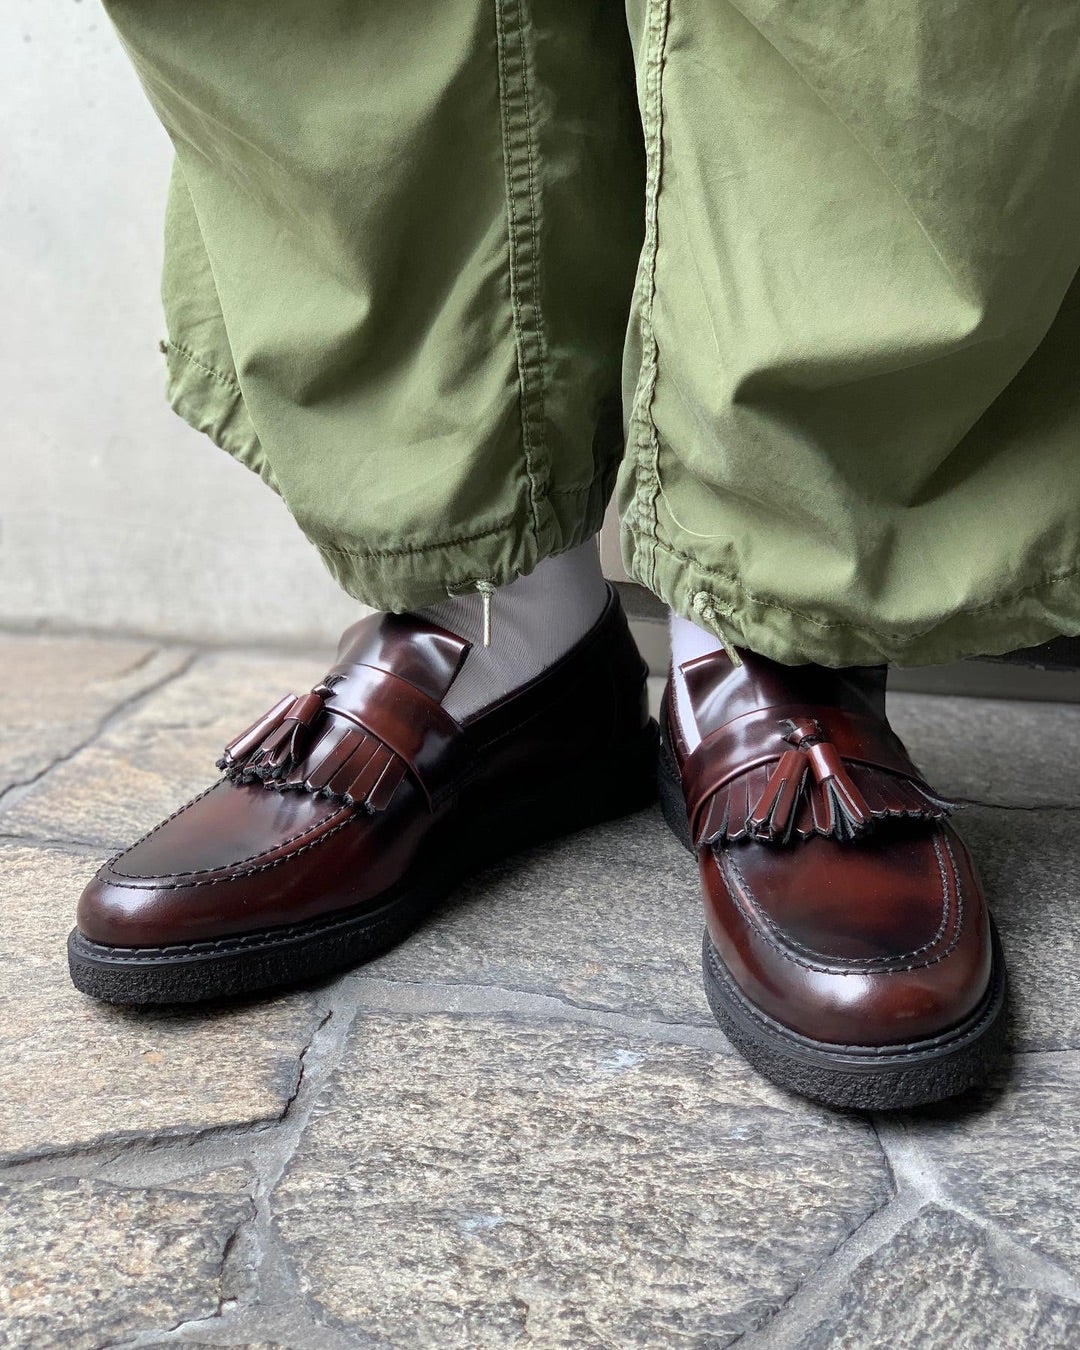 FREDPERRY×GEORGECOX TASSEL LOAFER、僕も欲しいです。。(並木坂 